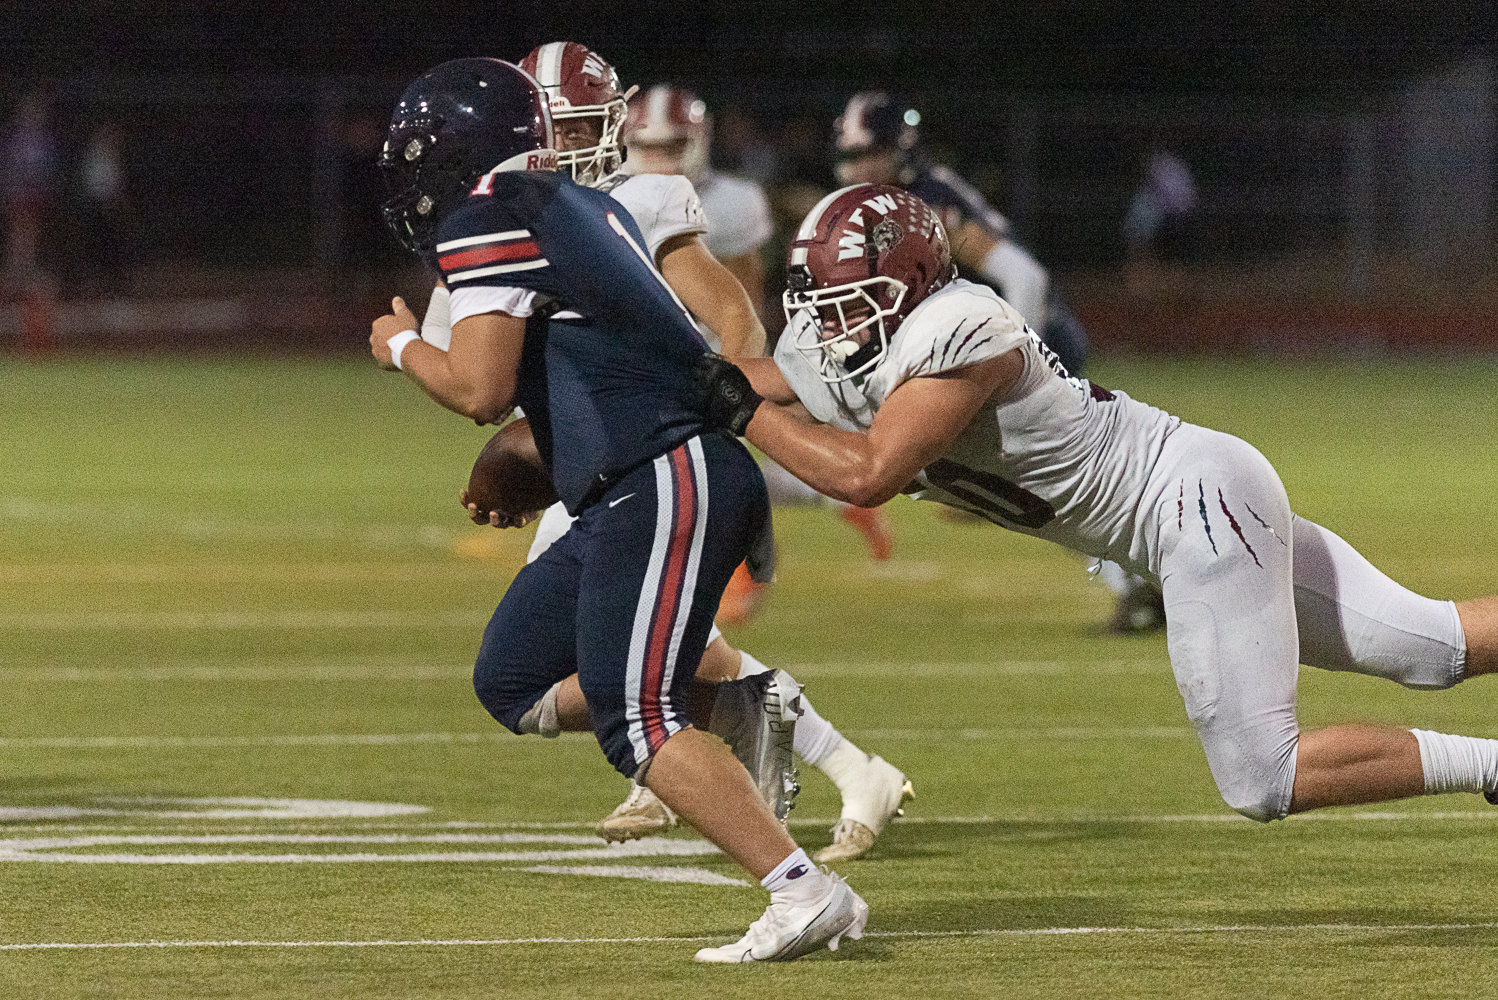 W.F. West defensive lineman William Buzzard flies in to sack Black Hills quarterback Jaxsen Beck during the Bearcats' 35-0 win over the Wolves at Tumwater District Stadium on Sept. 23.